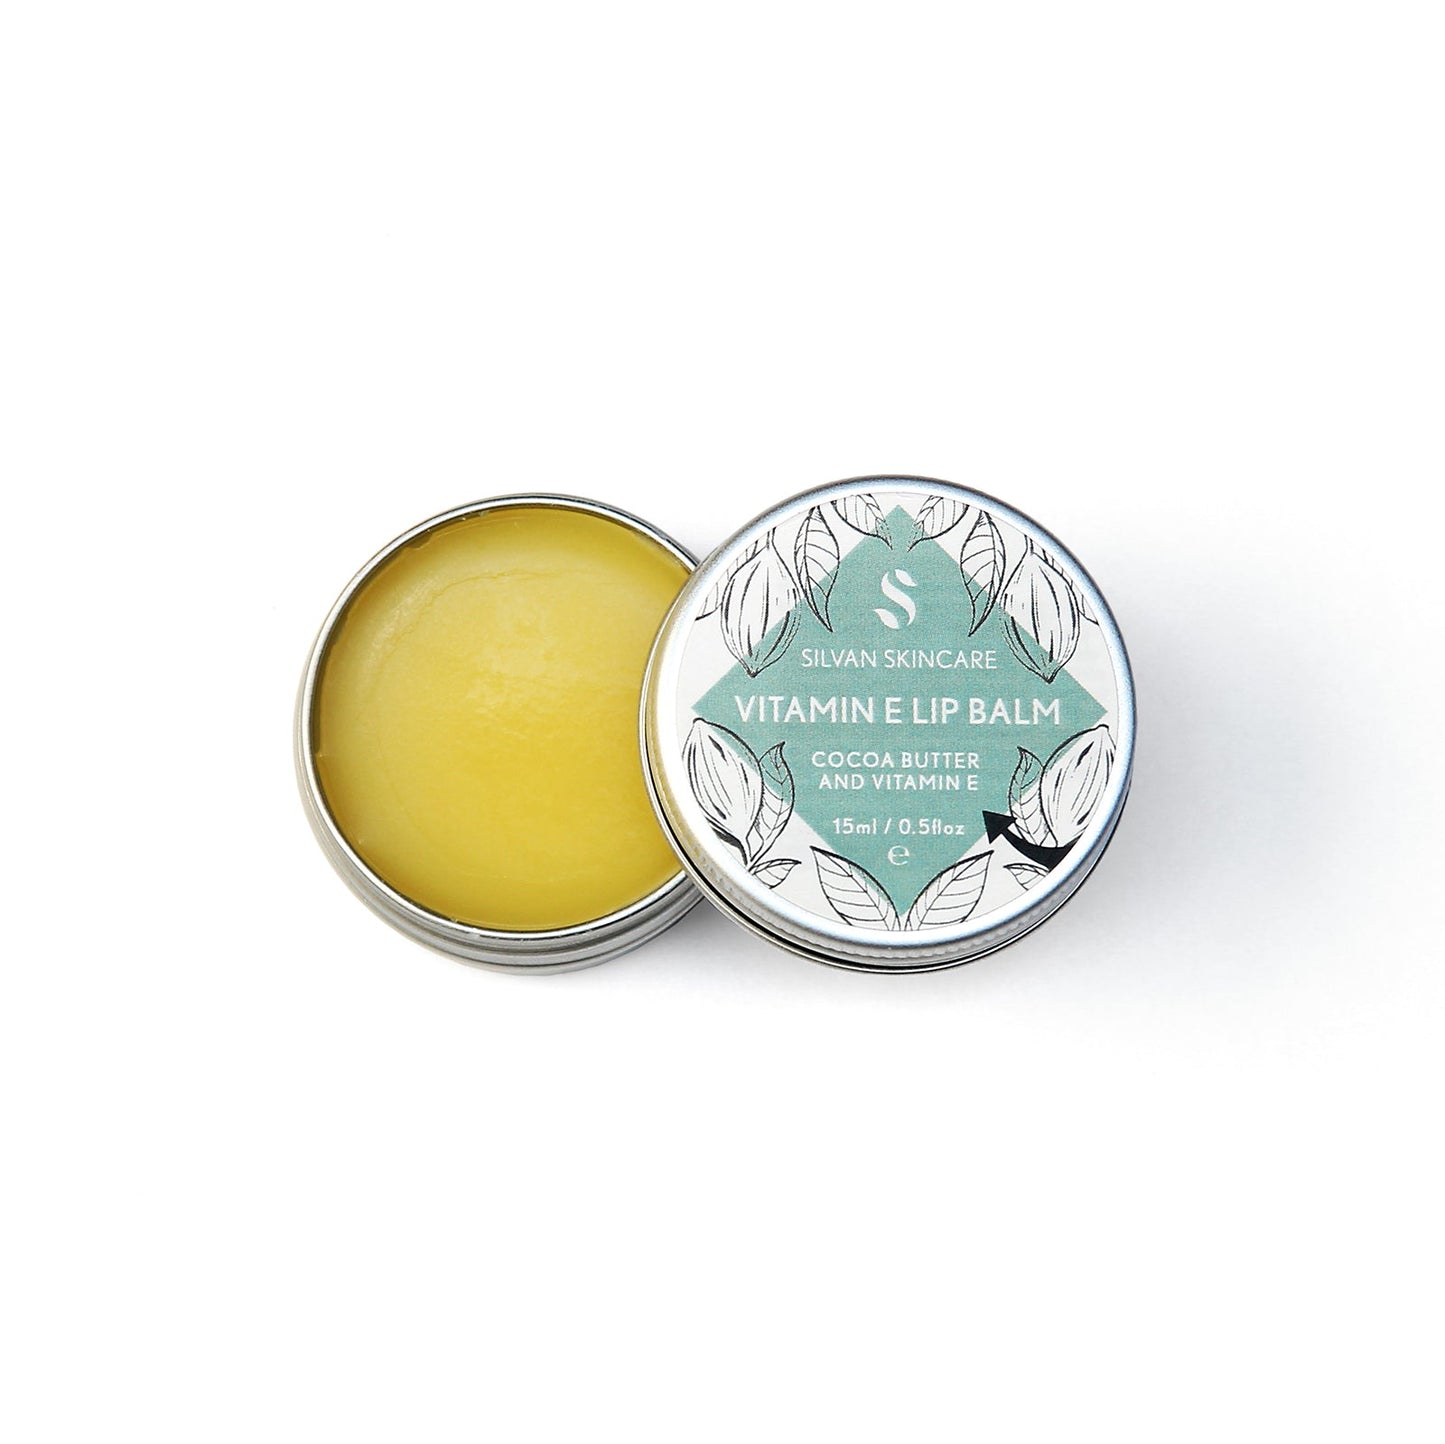 Single aluminium tin of the Silvan Skincare vitamin e lip balm. The pot in open, showing the yellow balm inside and the lid is beside it showing the white and blue label